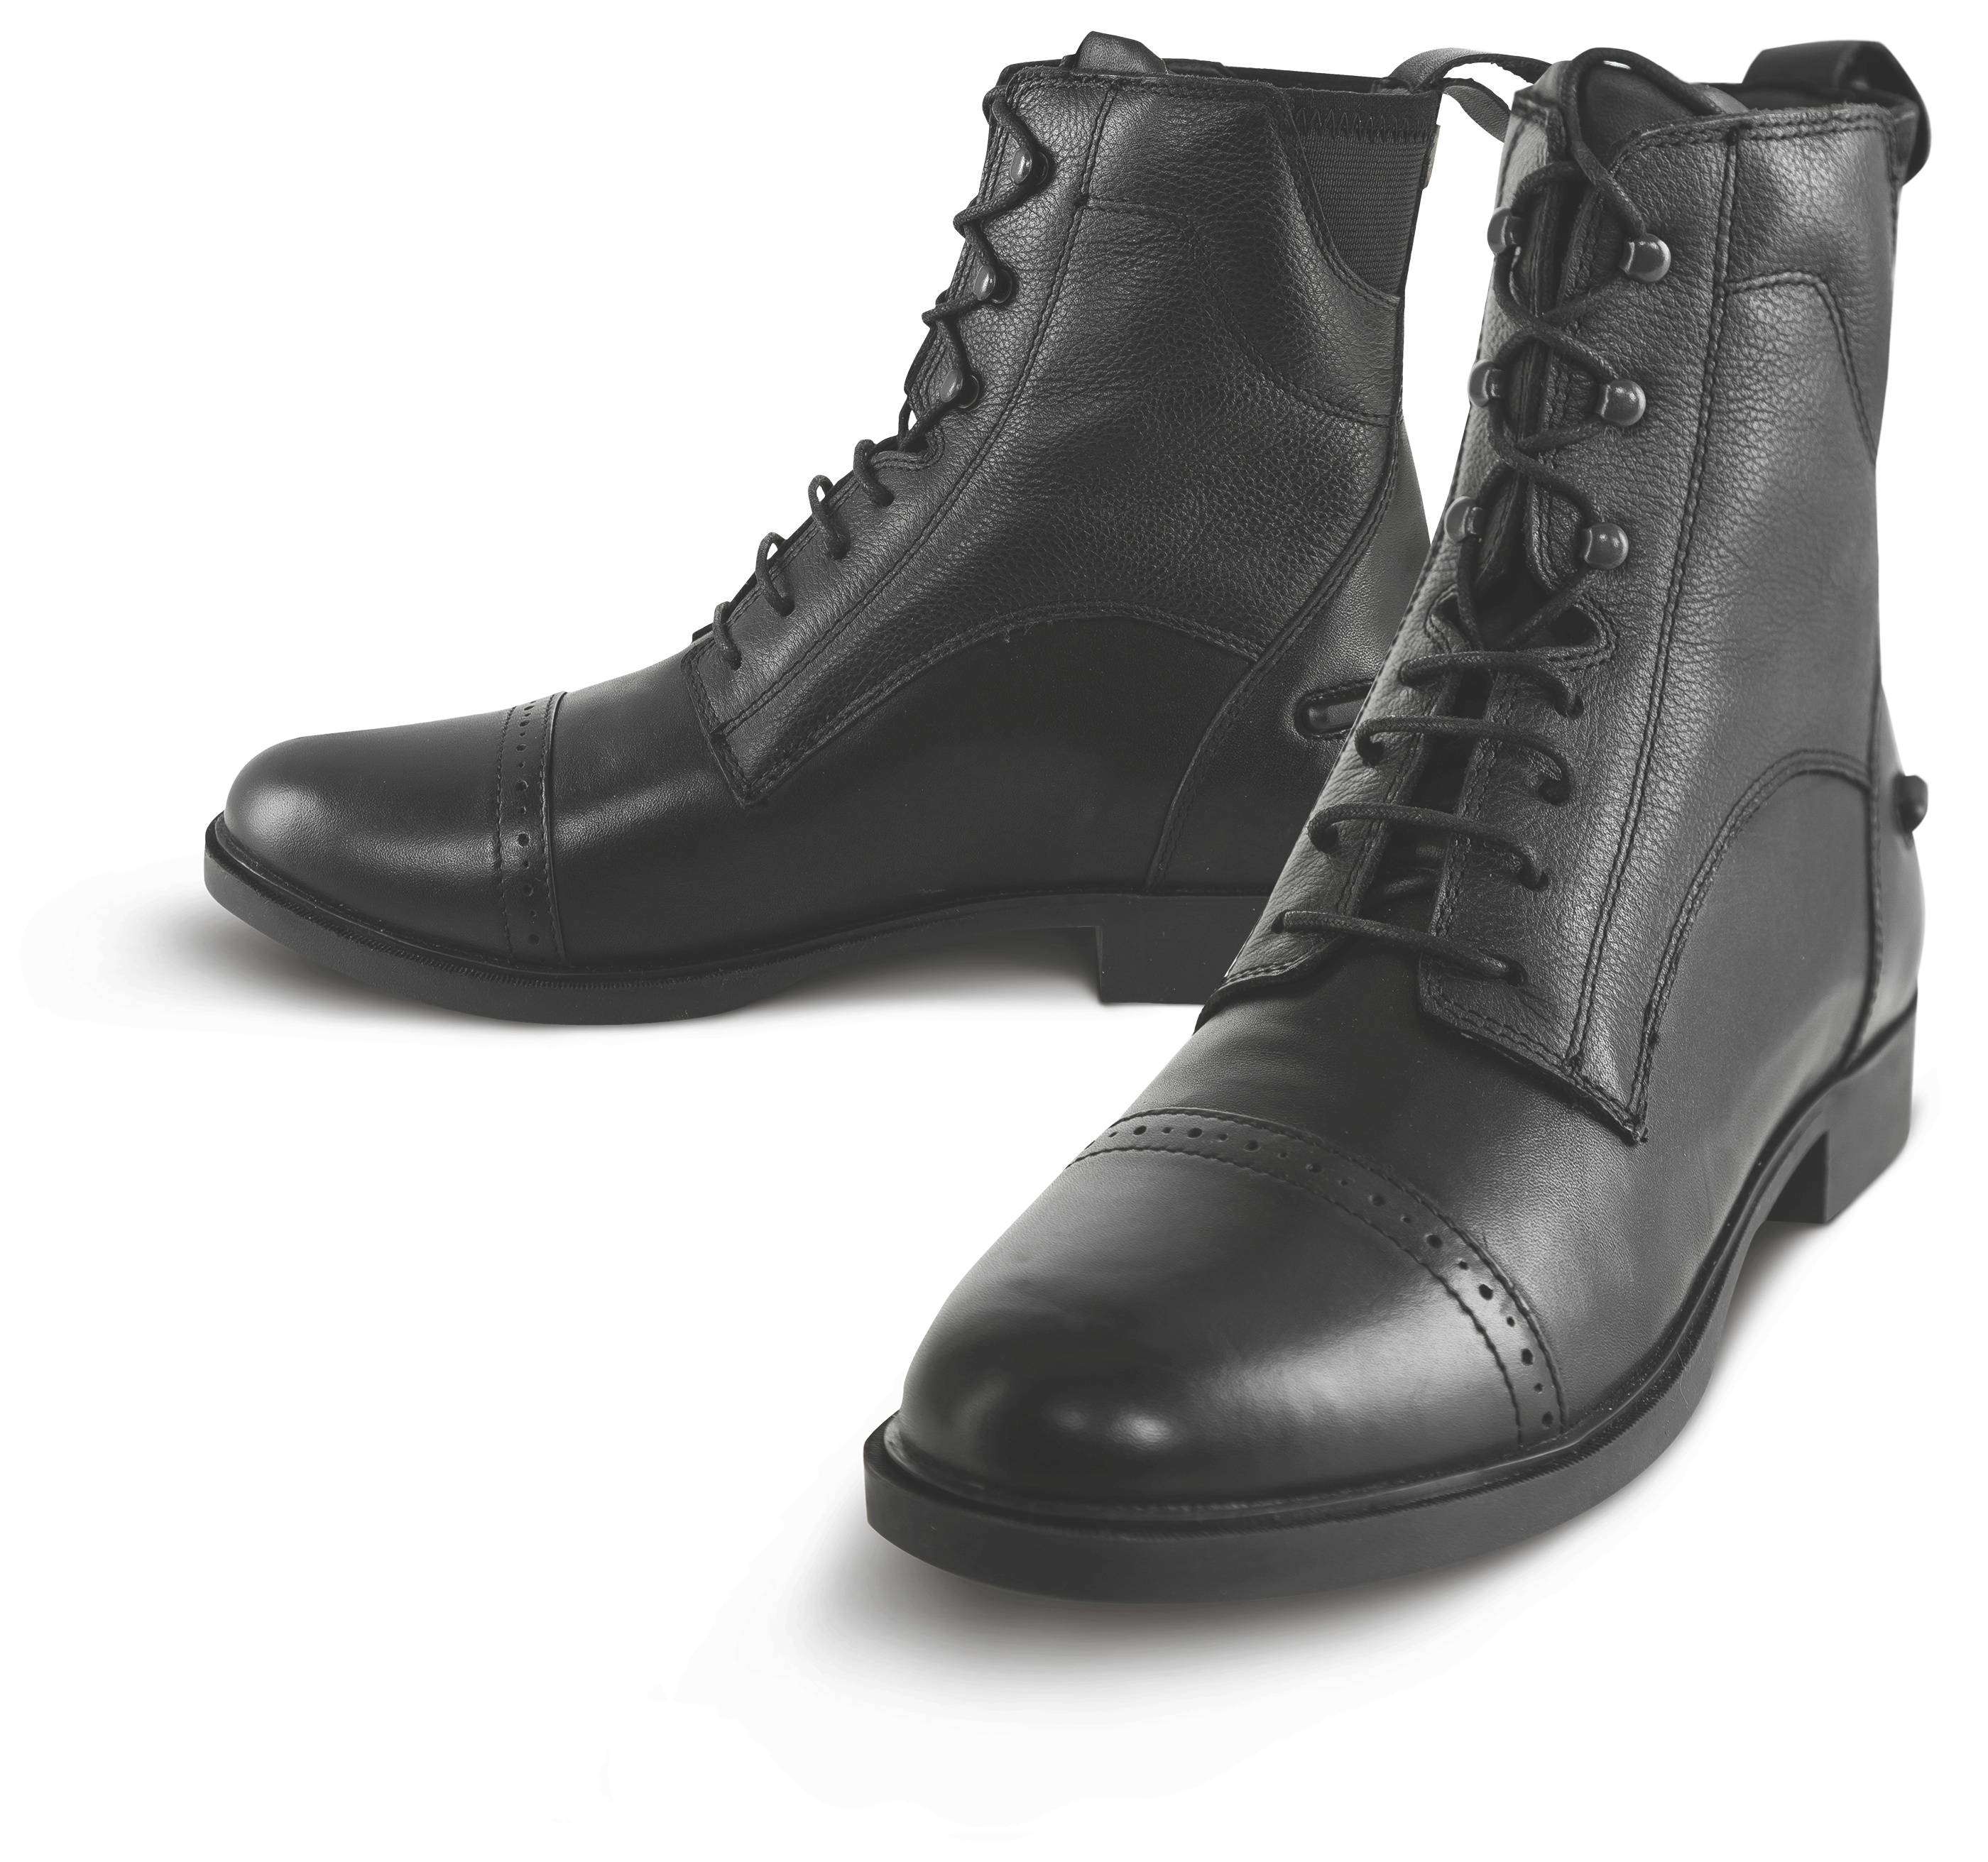 Tredstep Giotto II Lace Paddock Boots